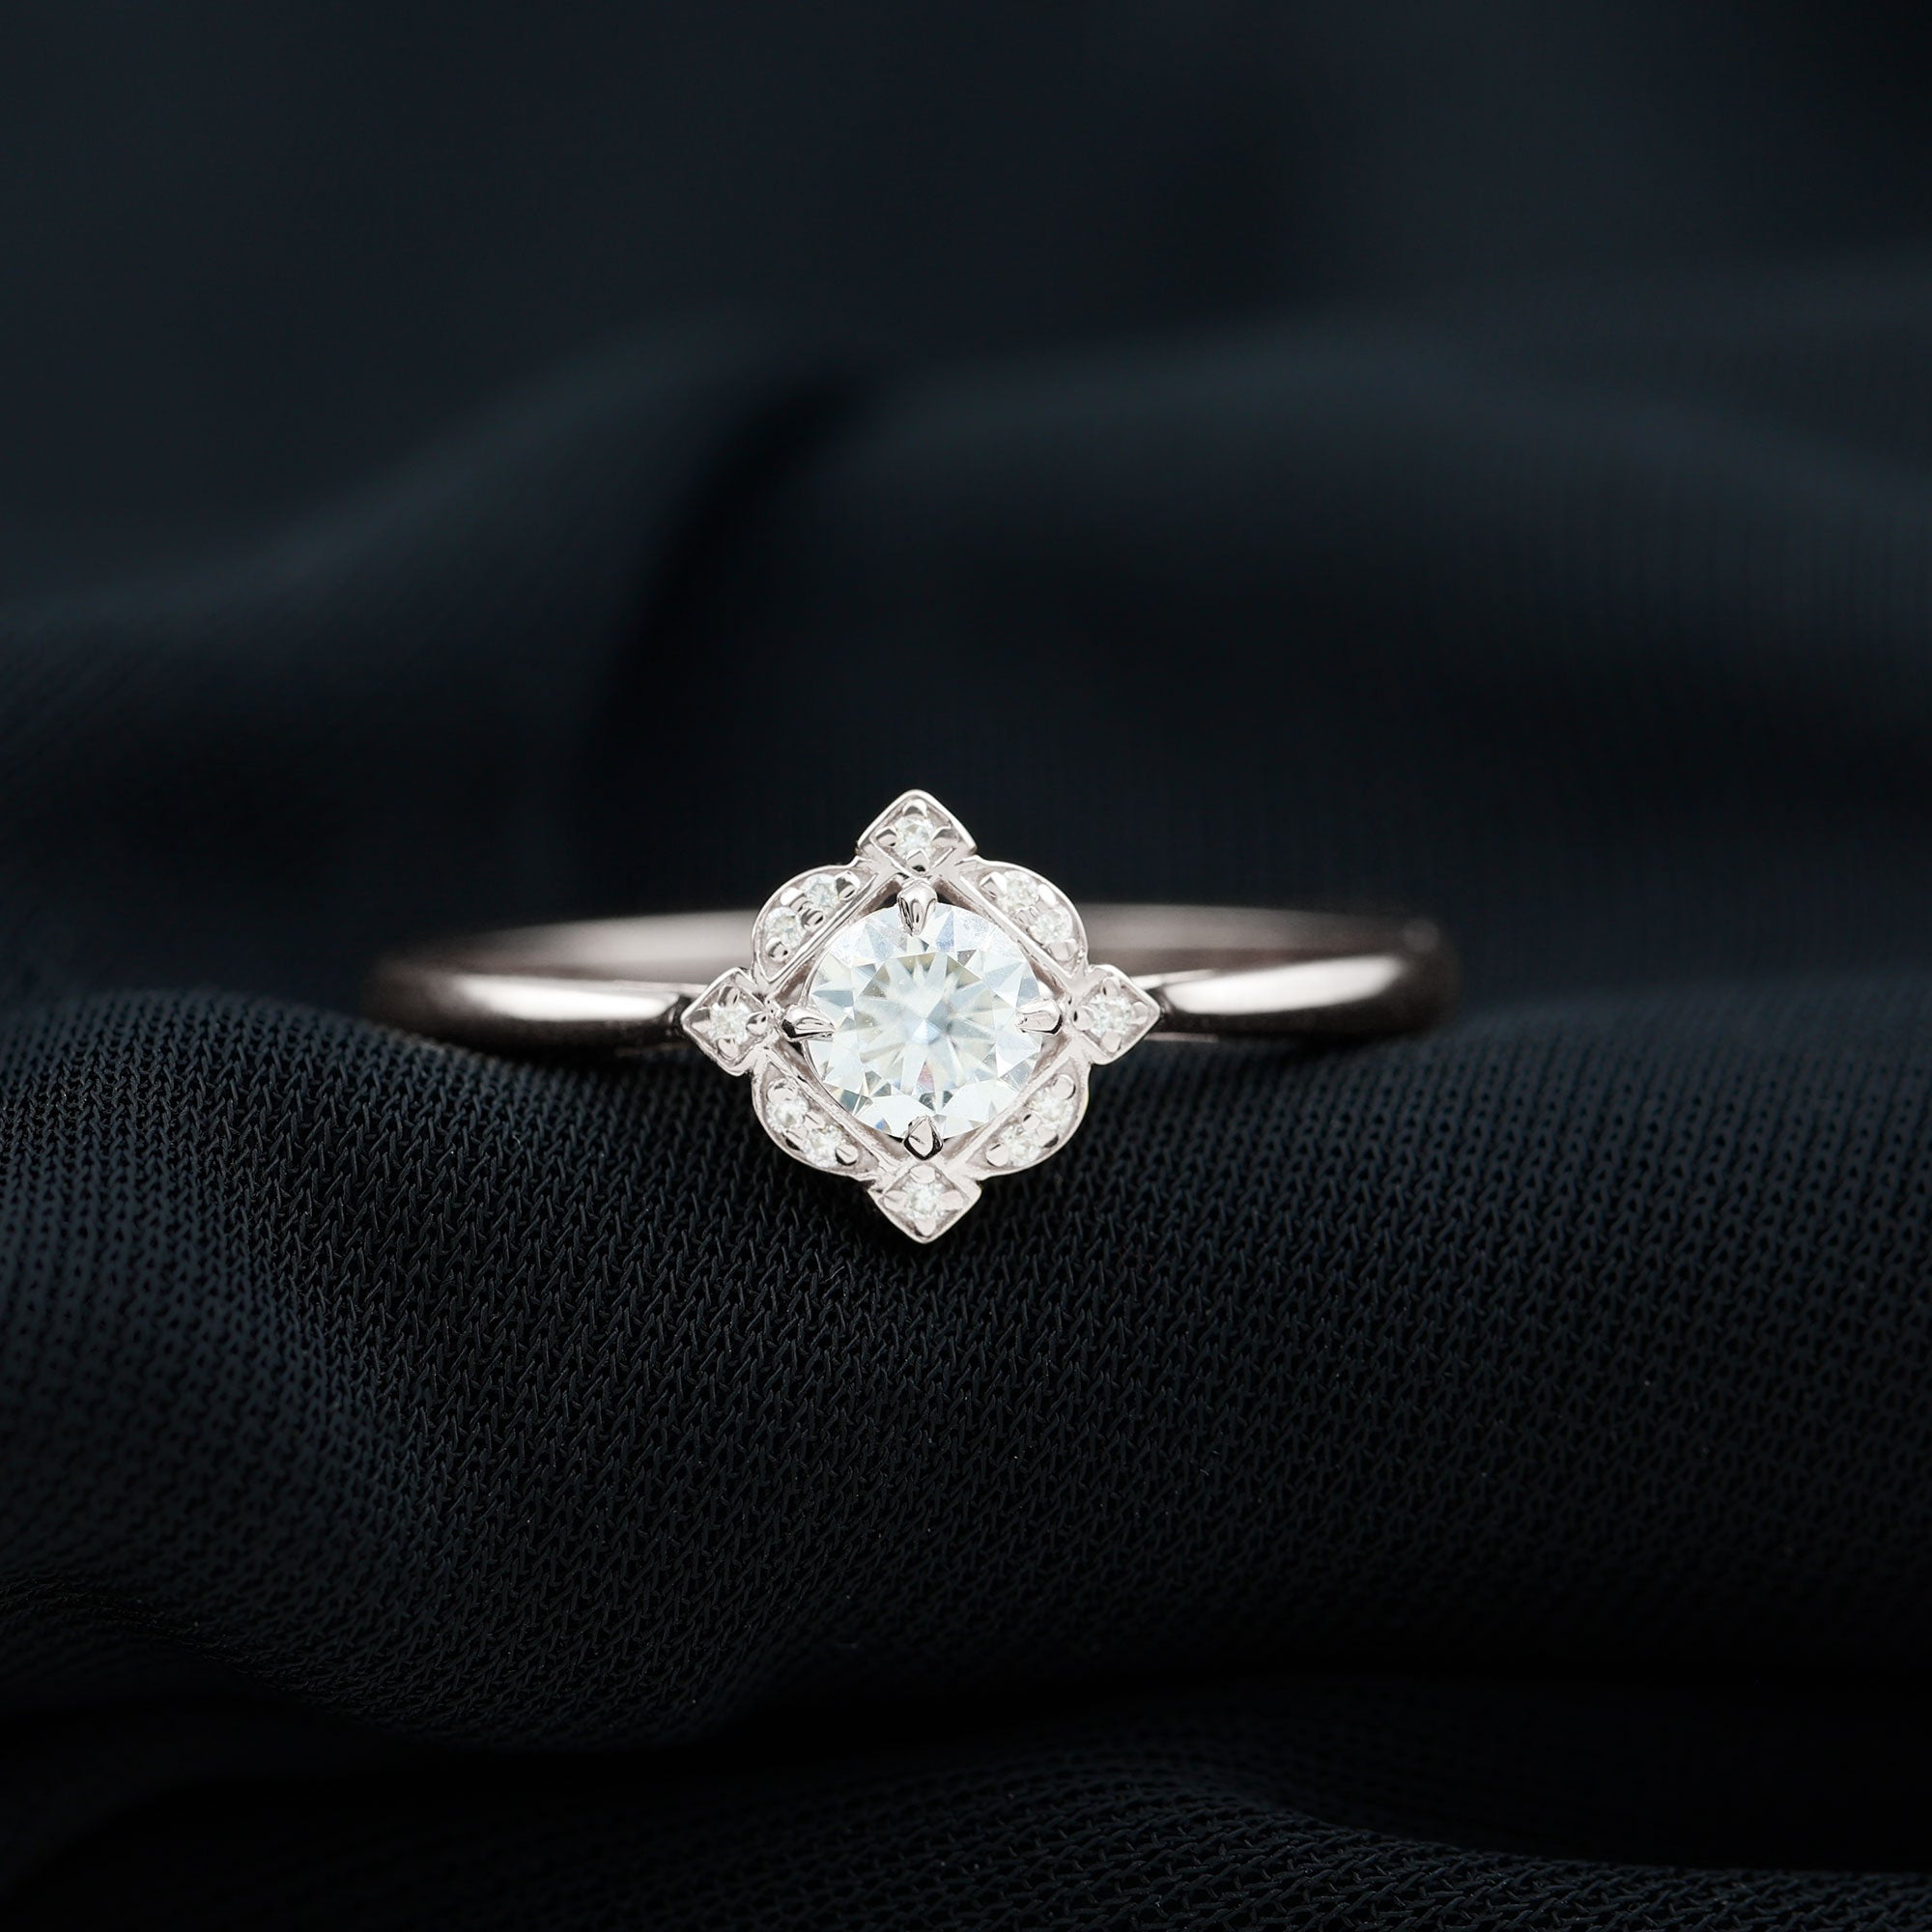 Moissanite Vintage Engagement Ring in Gold Moissanite - ( D-VS1 ) - Color and Clarity - Rosec Jewels